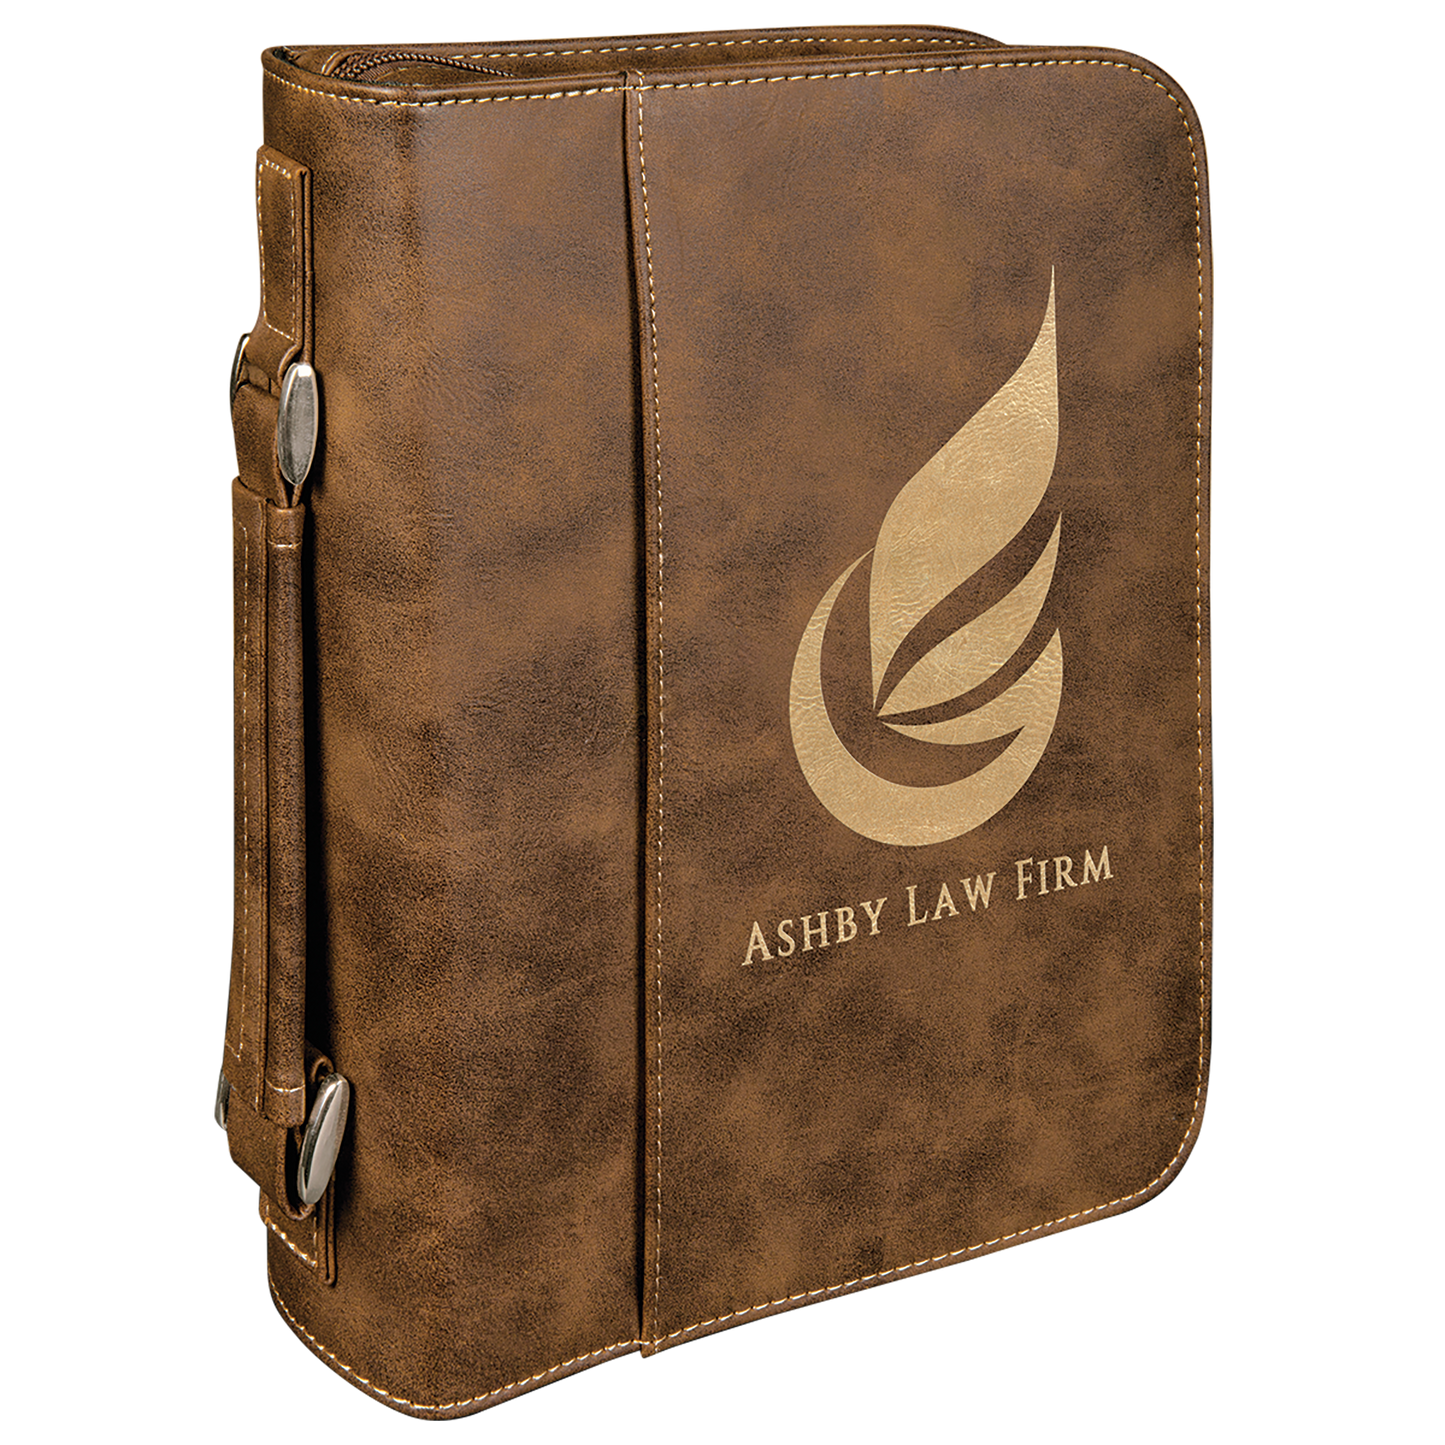 Leatherette Book/Bible Cover